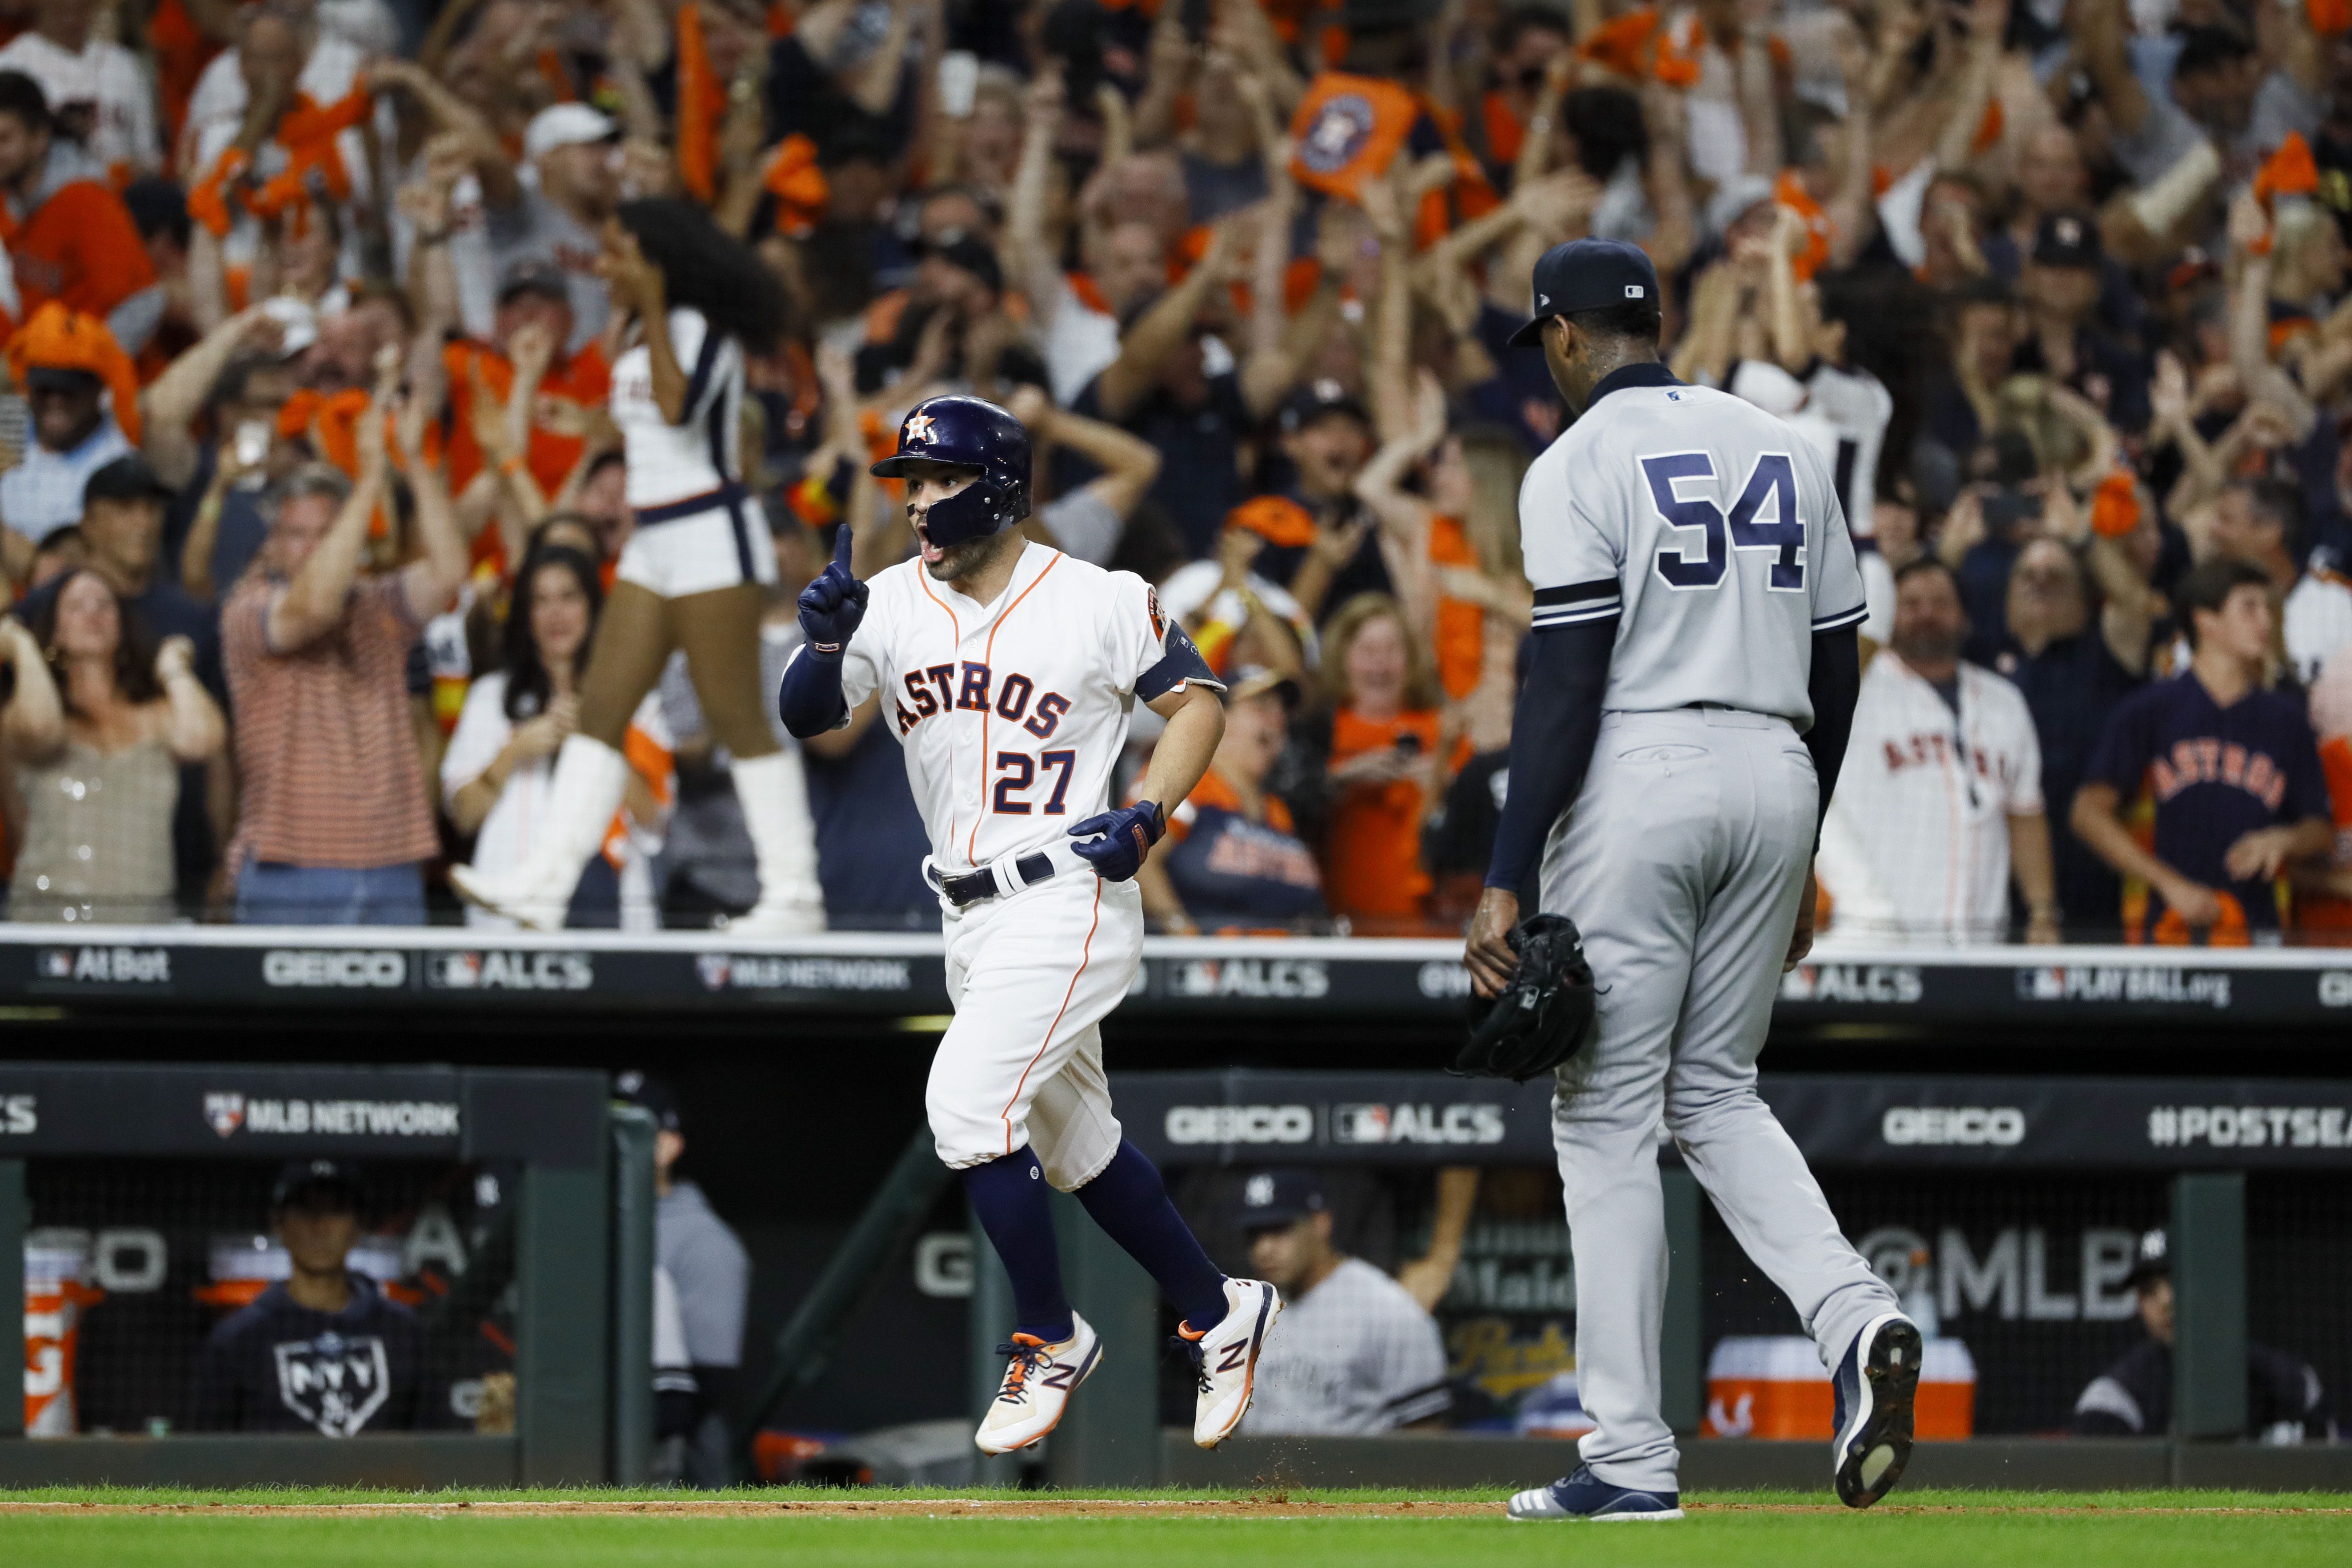 MLB rumors: Astros' Jose Altuve ducks question on using buzzer during 2019  ALCS to rob Yankees of World Series appearance 